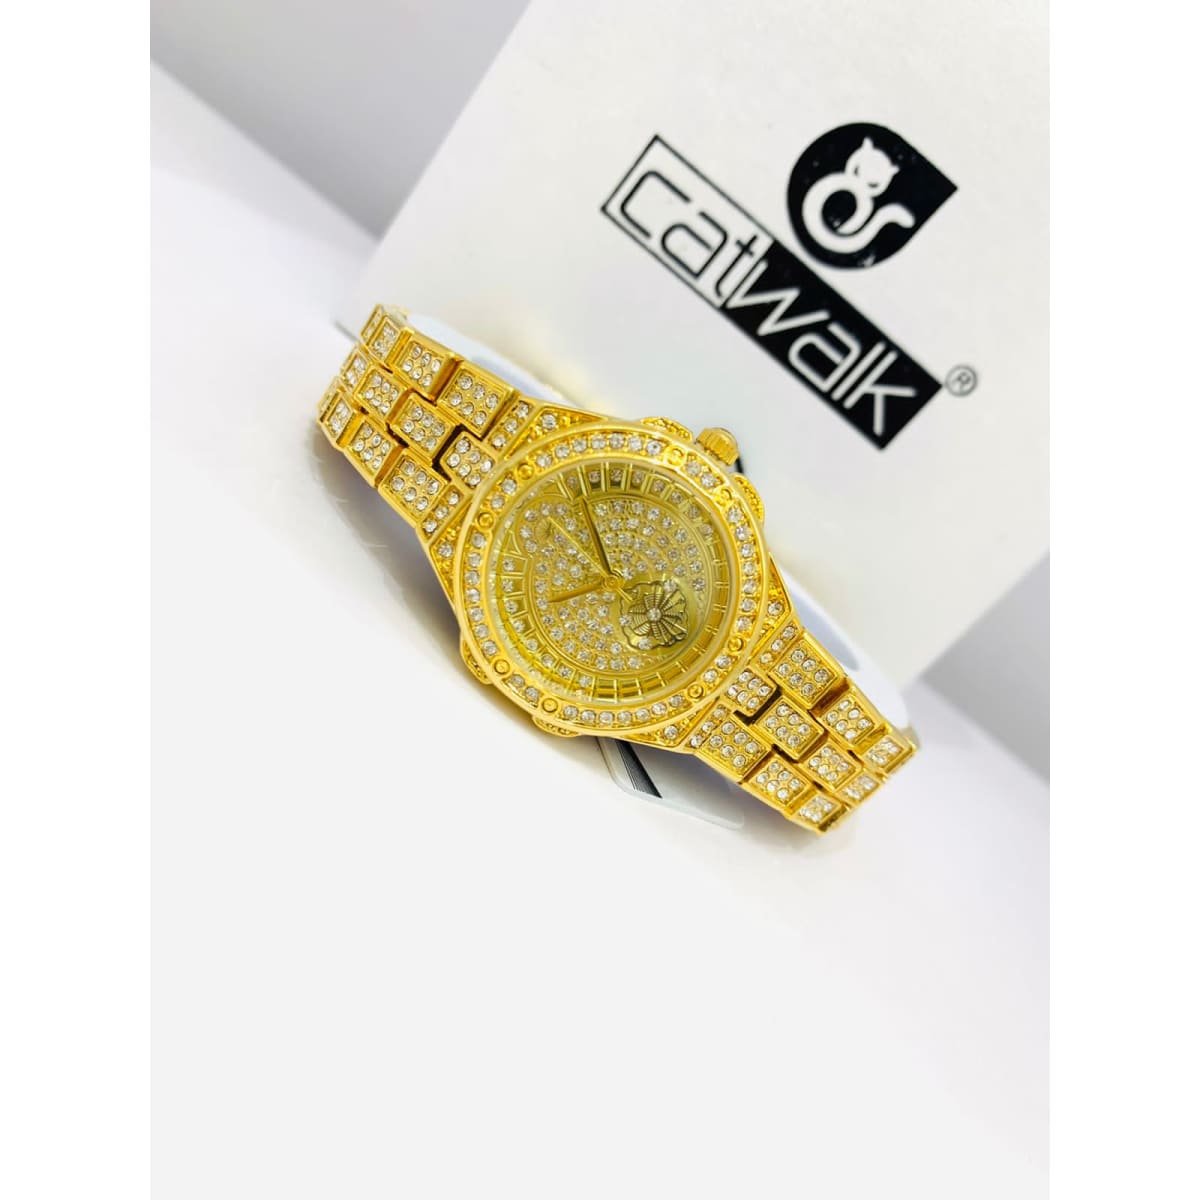 Catwalk CW2022/3 Fashionable Cz Stone Covered Analog Stainless Watch for Women with Gift Box Shop